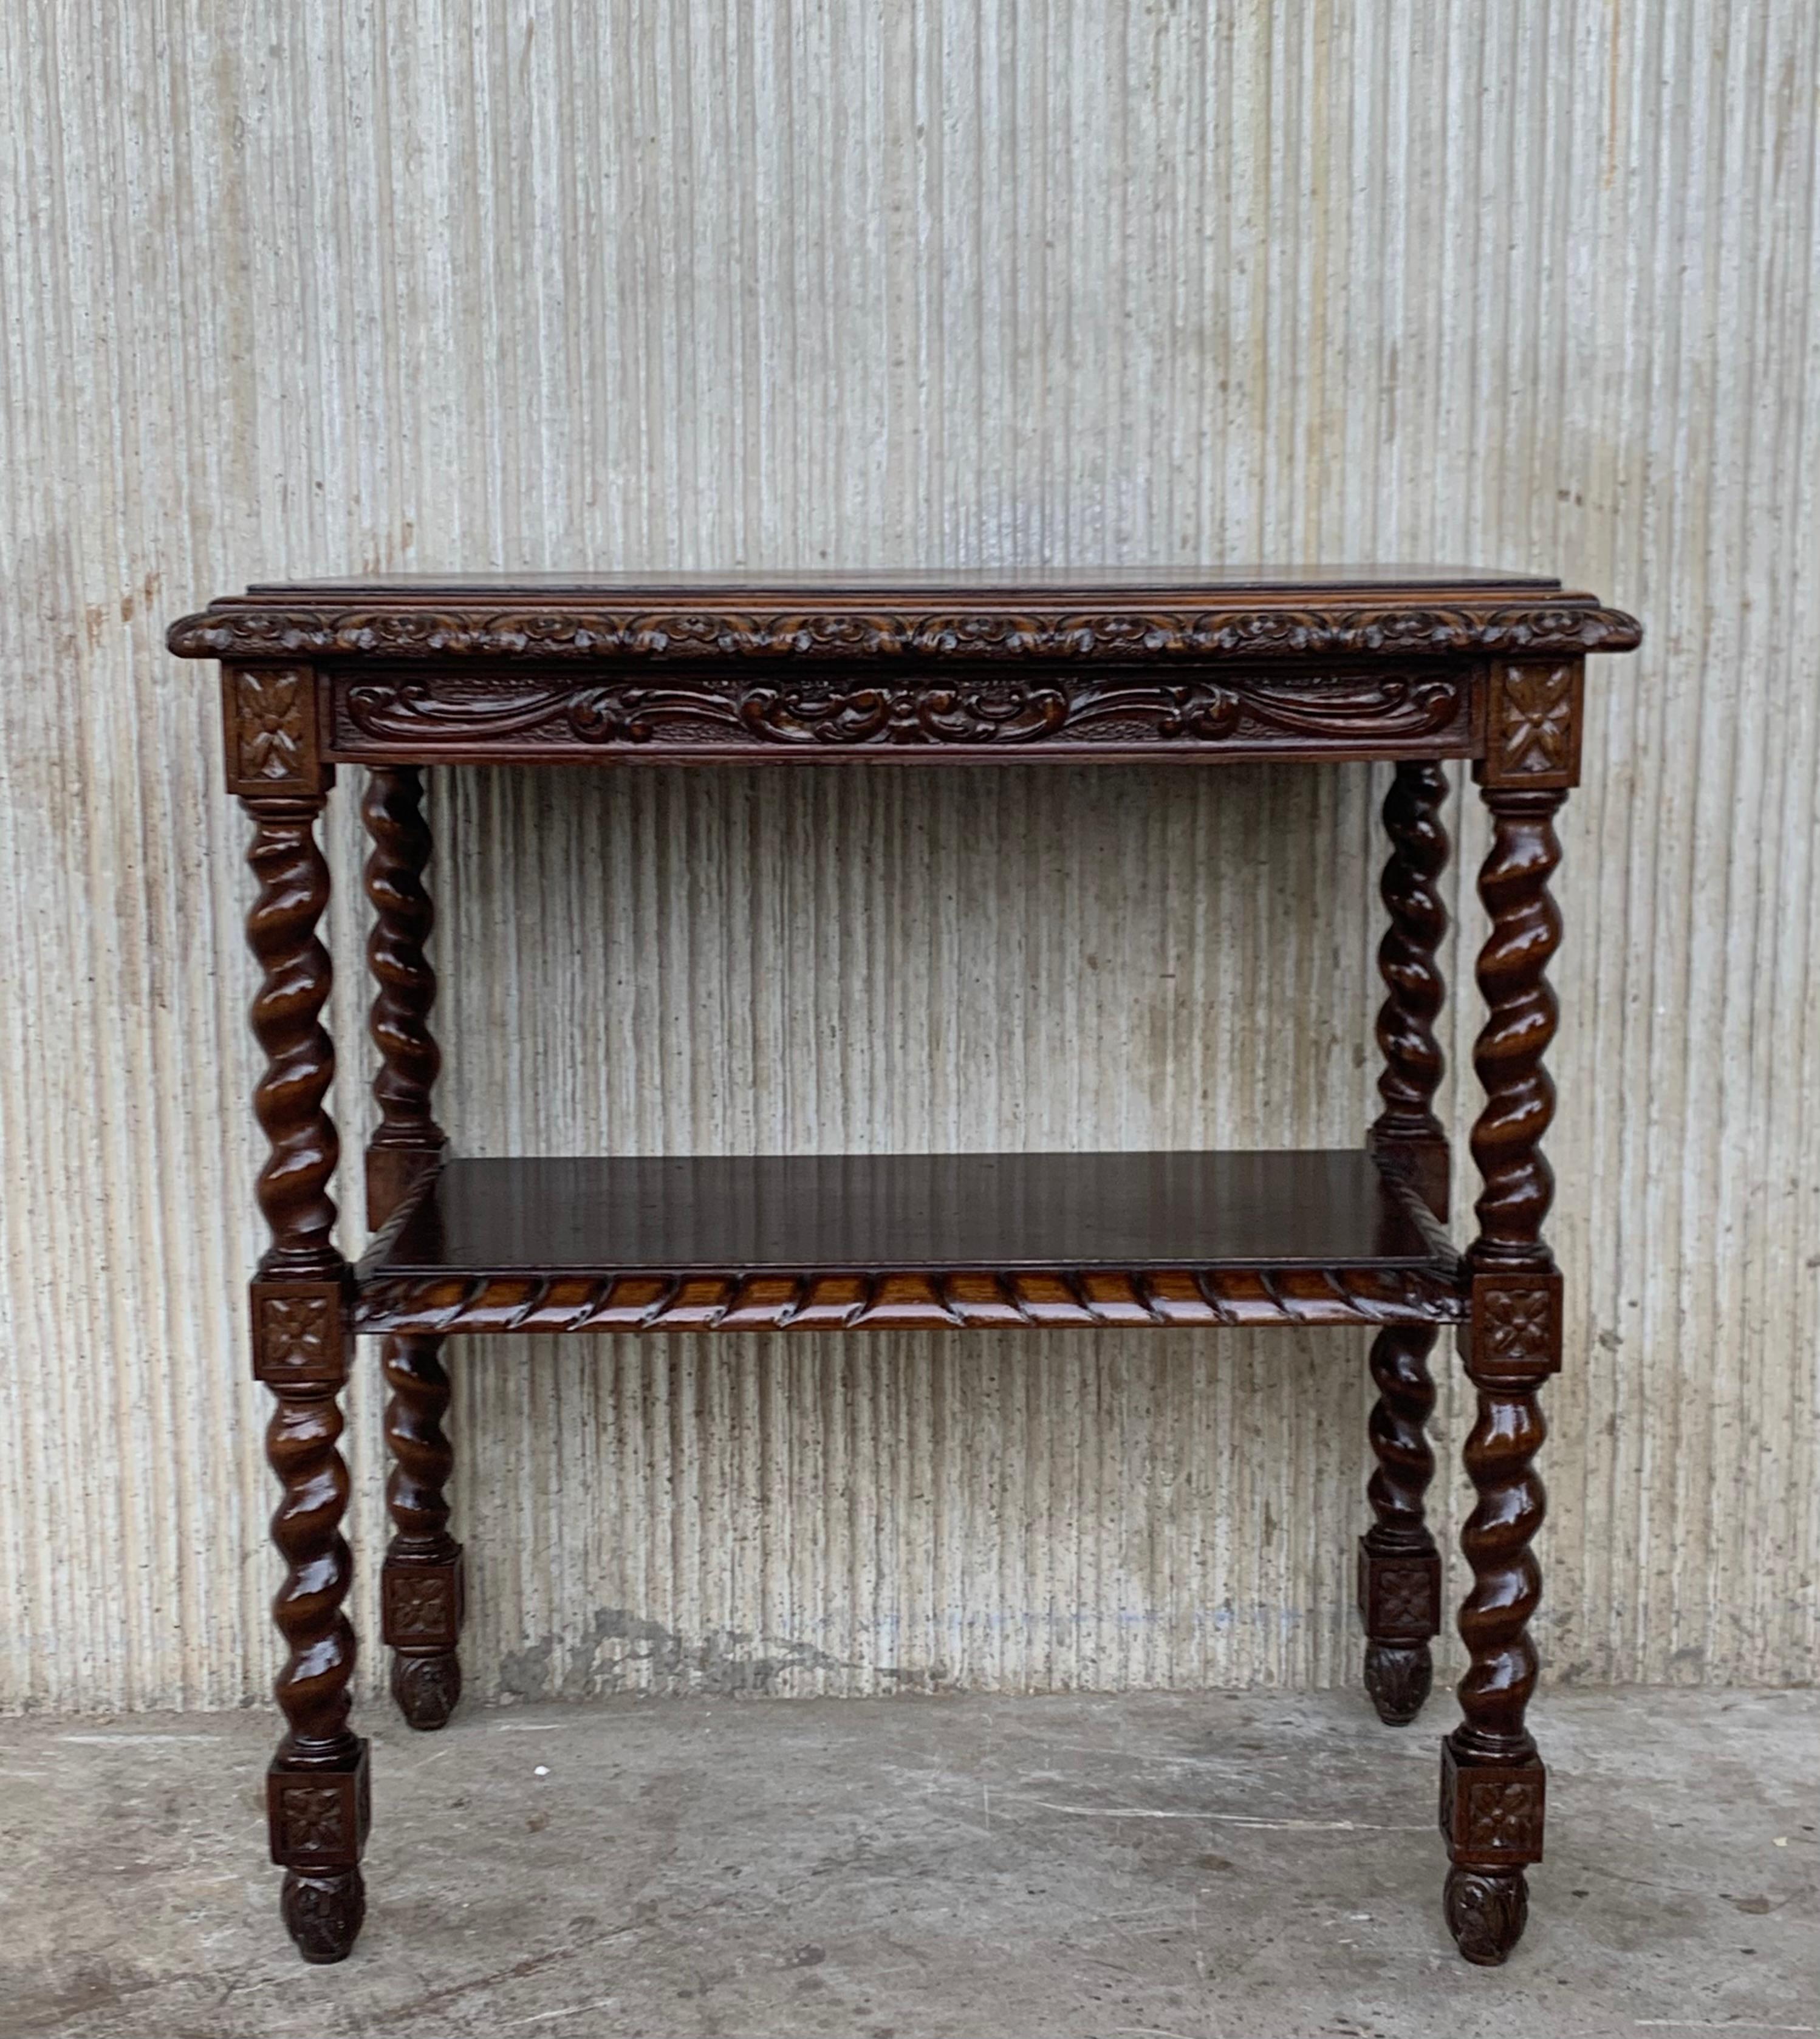 A Spanish walnut side table with low shelve, scalloped apron and turned legs from the late 19th century. This elegant Spanish table features a simple, rectangular top adorned with unusual decorative patterns. The table is raised on an exquisite